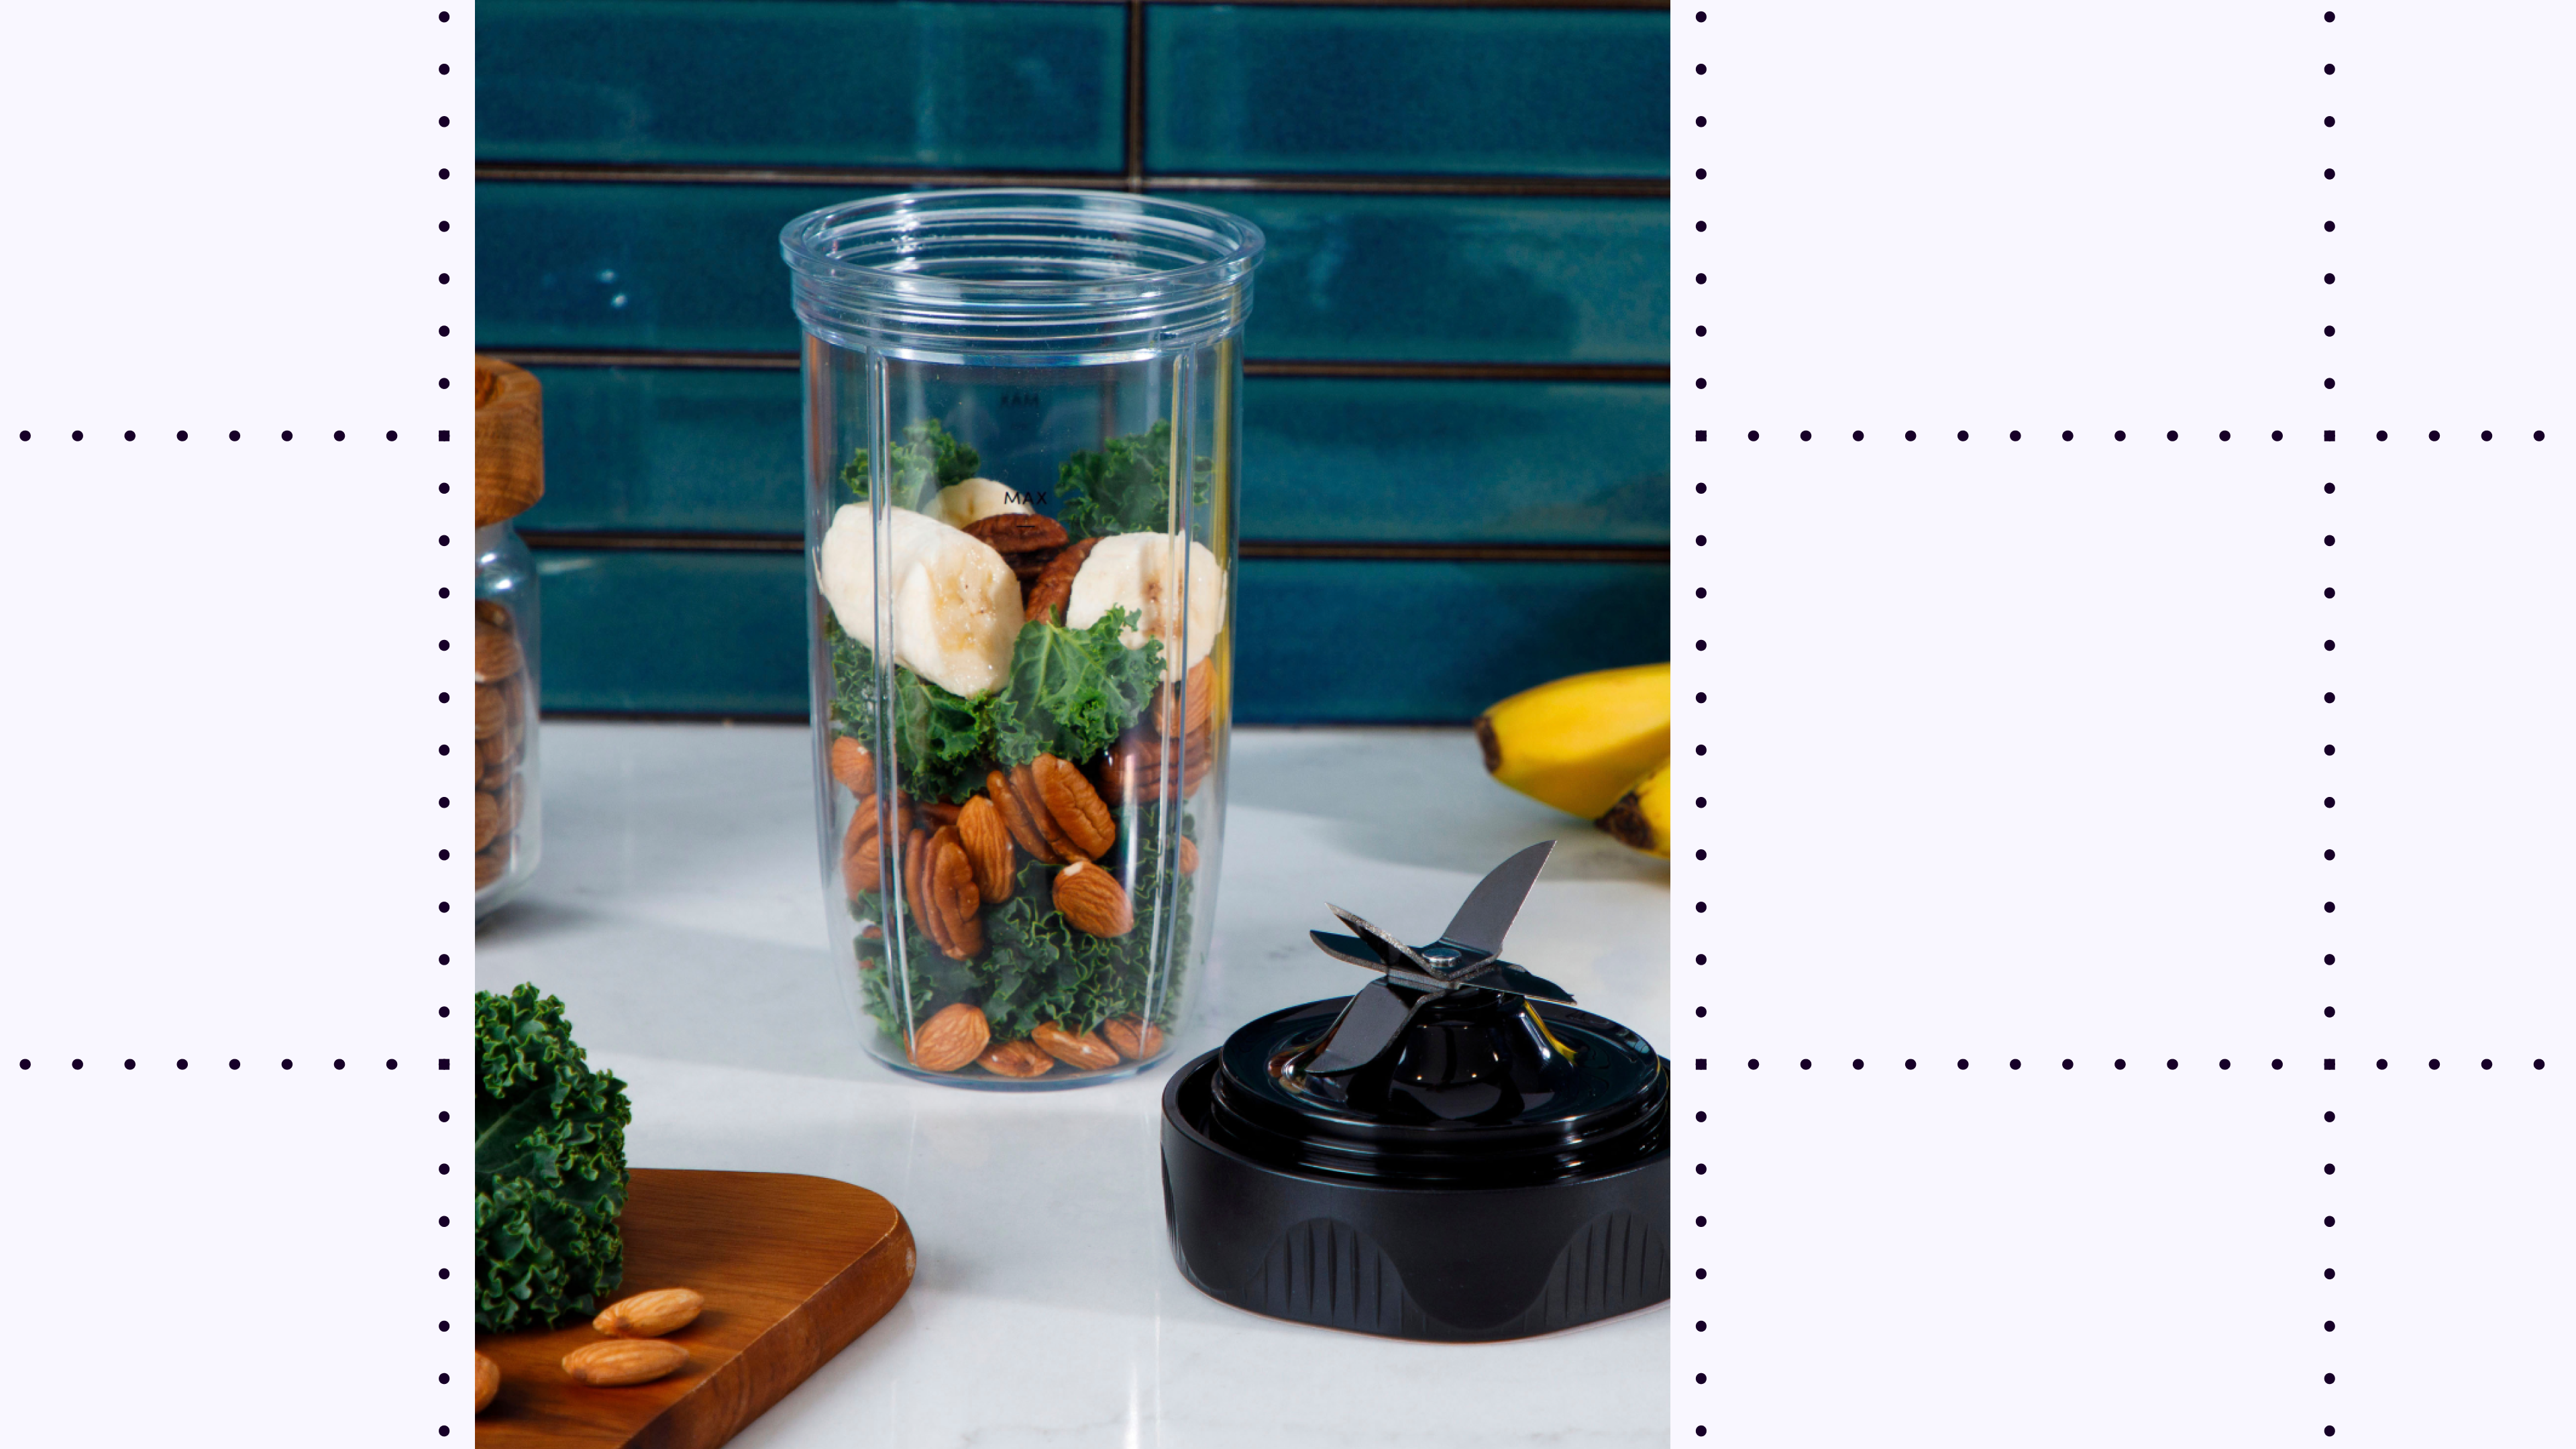 nutribullet Tritan Renew 32 oz Cup with To-Go Lid